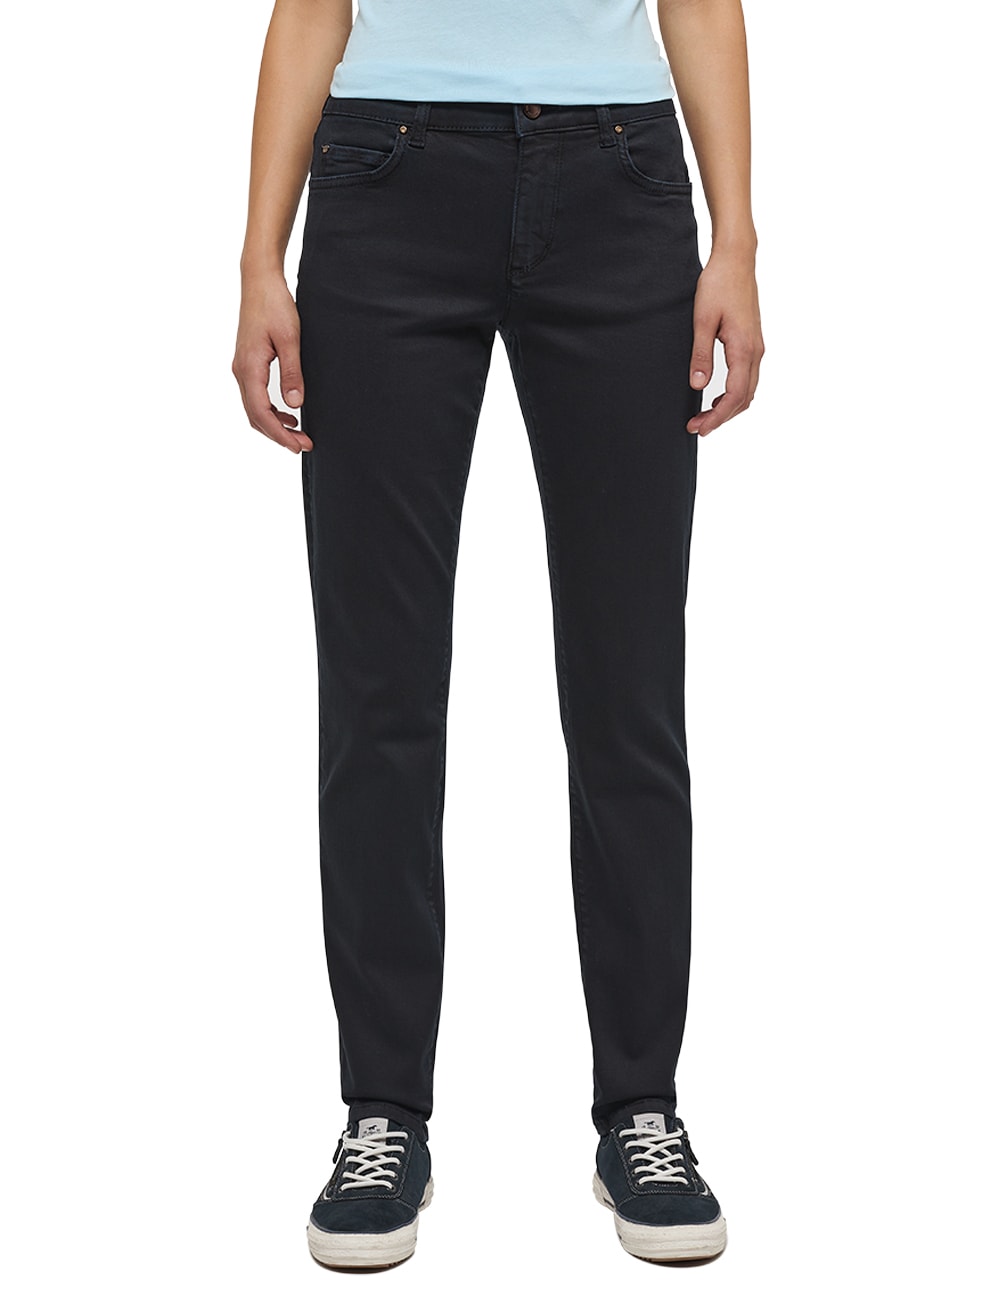 MUSTANG Stretch-Jeans »Style Crosby Relaxed Slim« von mustang